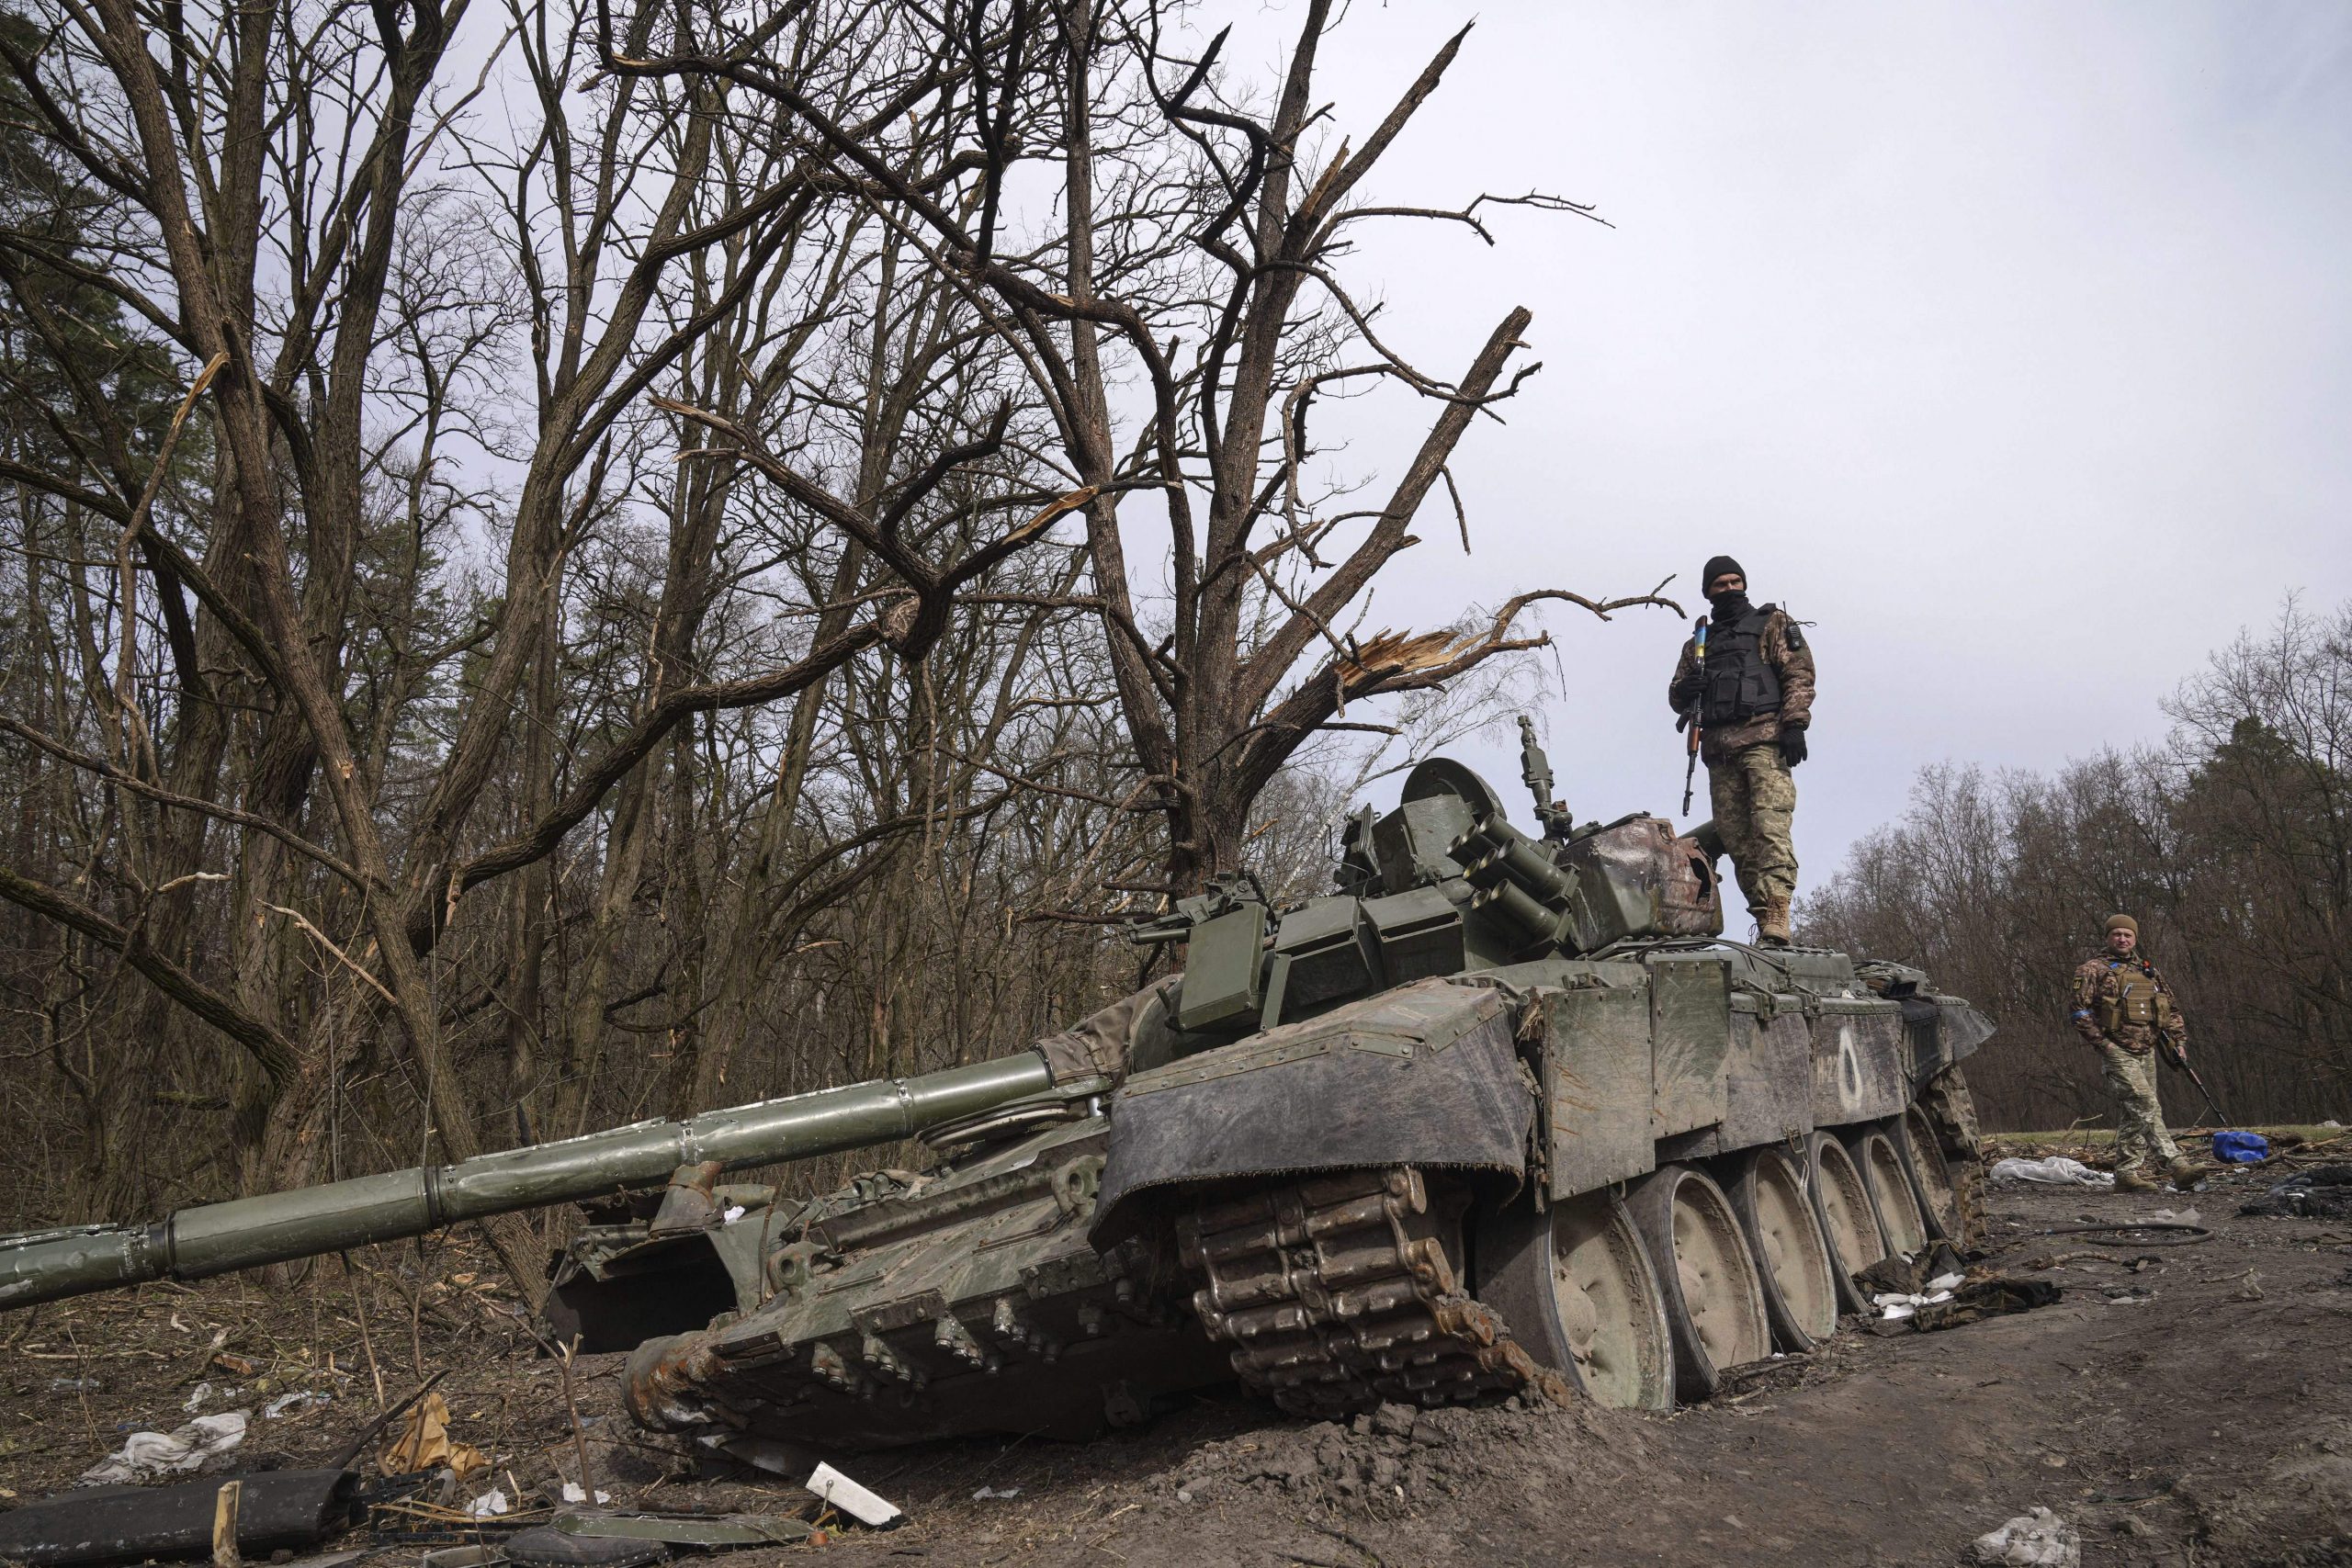 Abandoning the pincer: What to expect in Russia’s new onslaught on Ukraine?